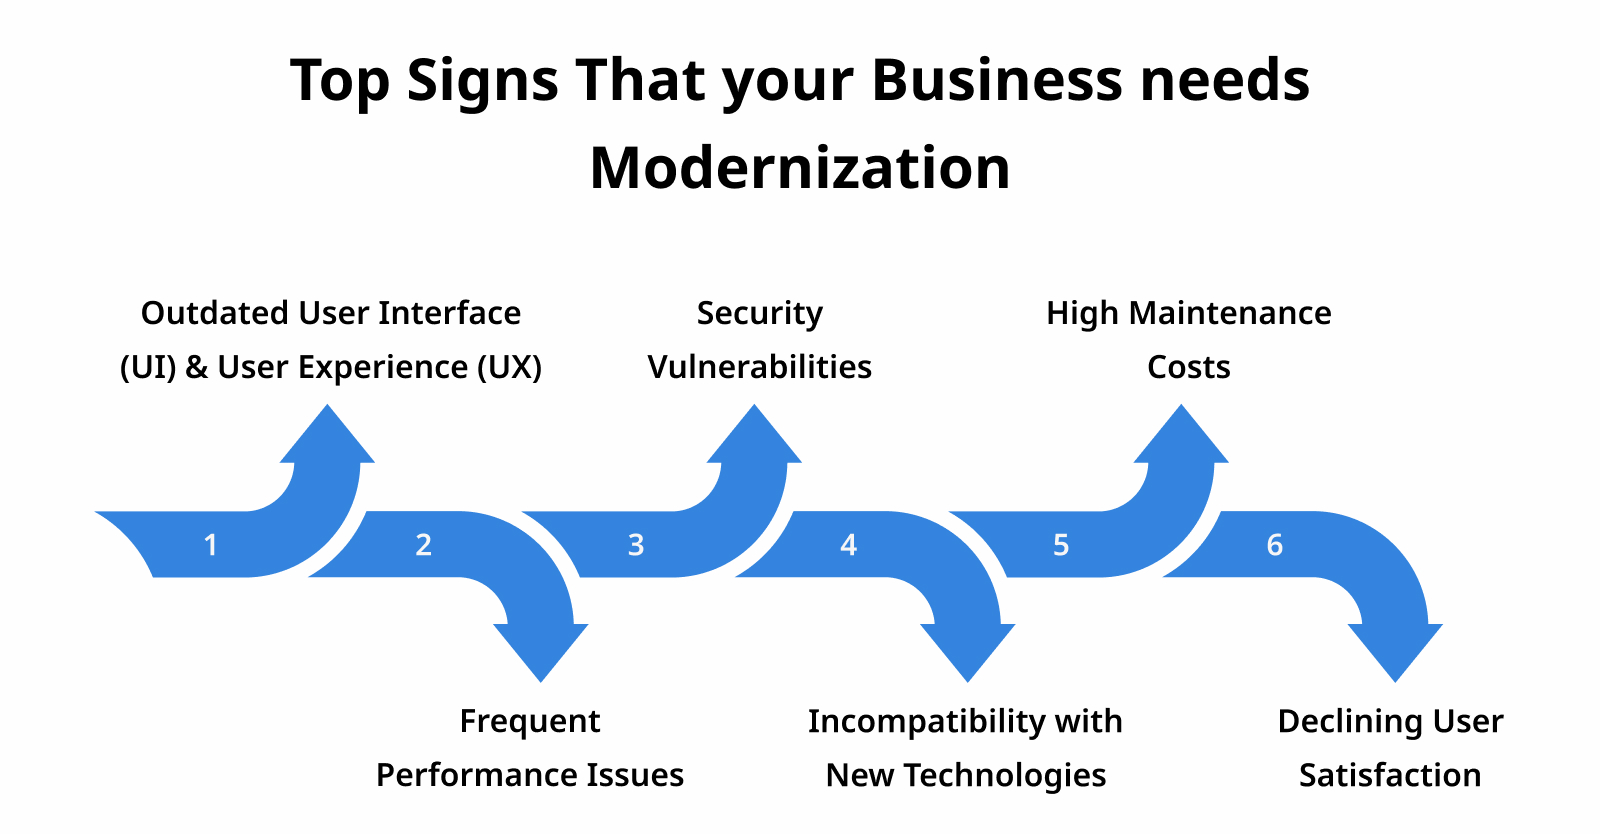 Top Signs That your Business needs Modernization